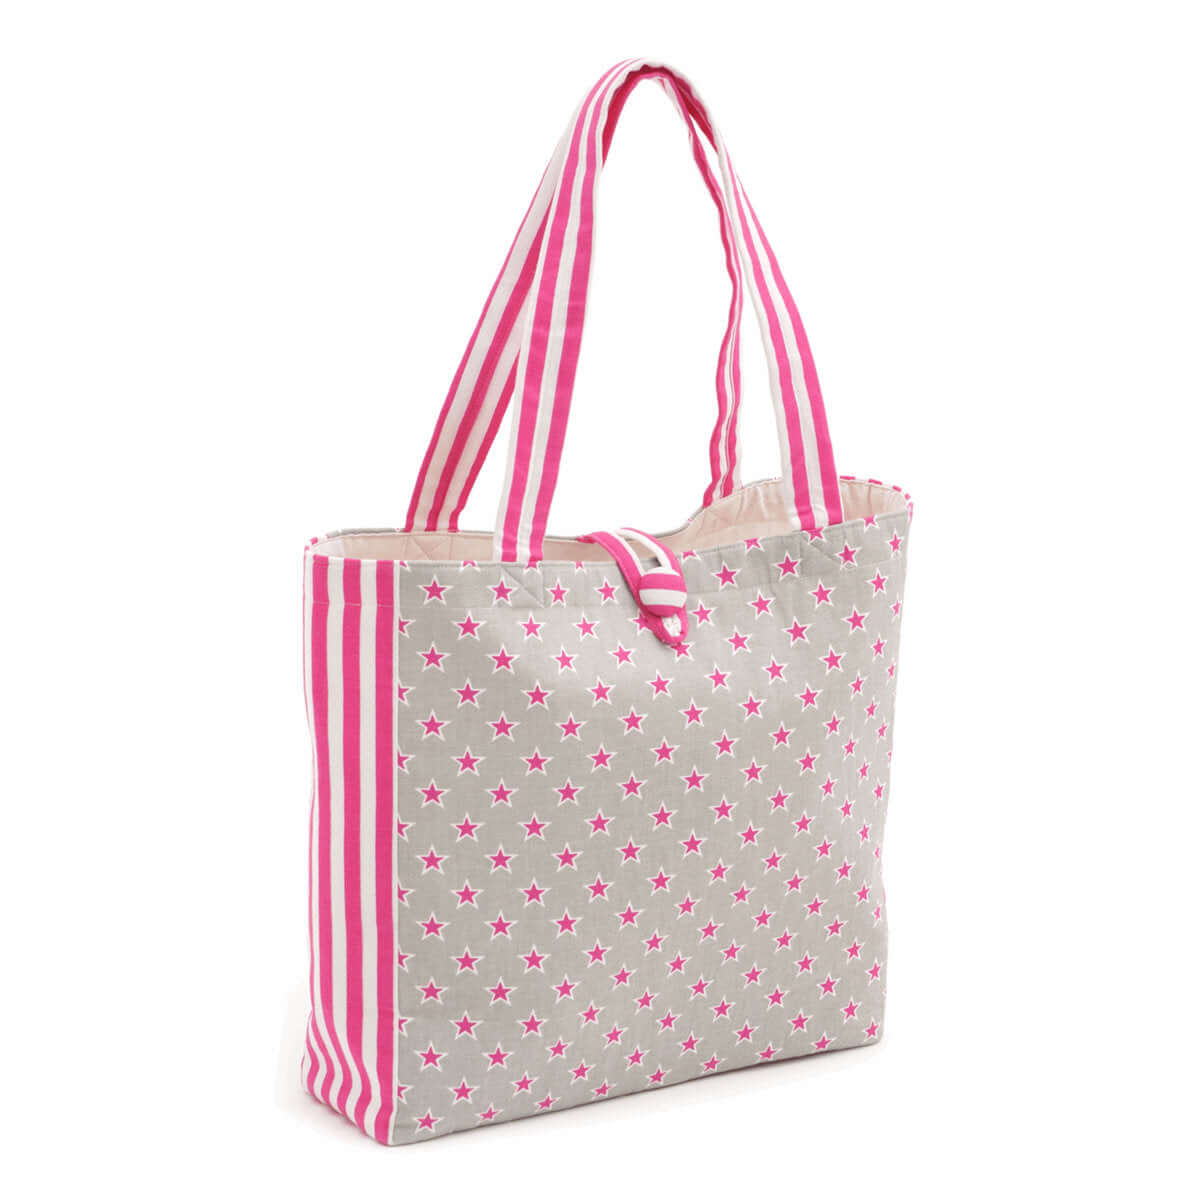 Stars & Stripes Shoulder Craft Tote Bag. Sewing/craft organisation, shopping bag or sewing gift. Hot pink and natural canvas look.